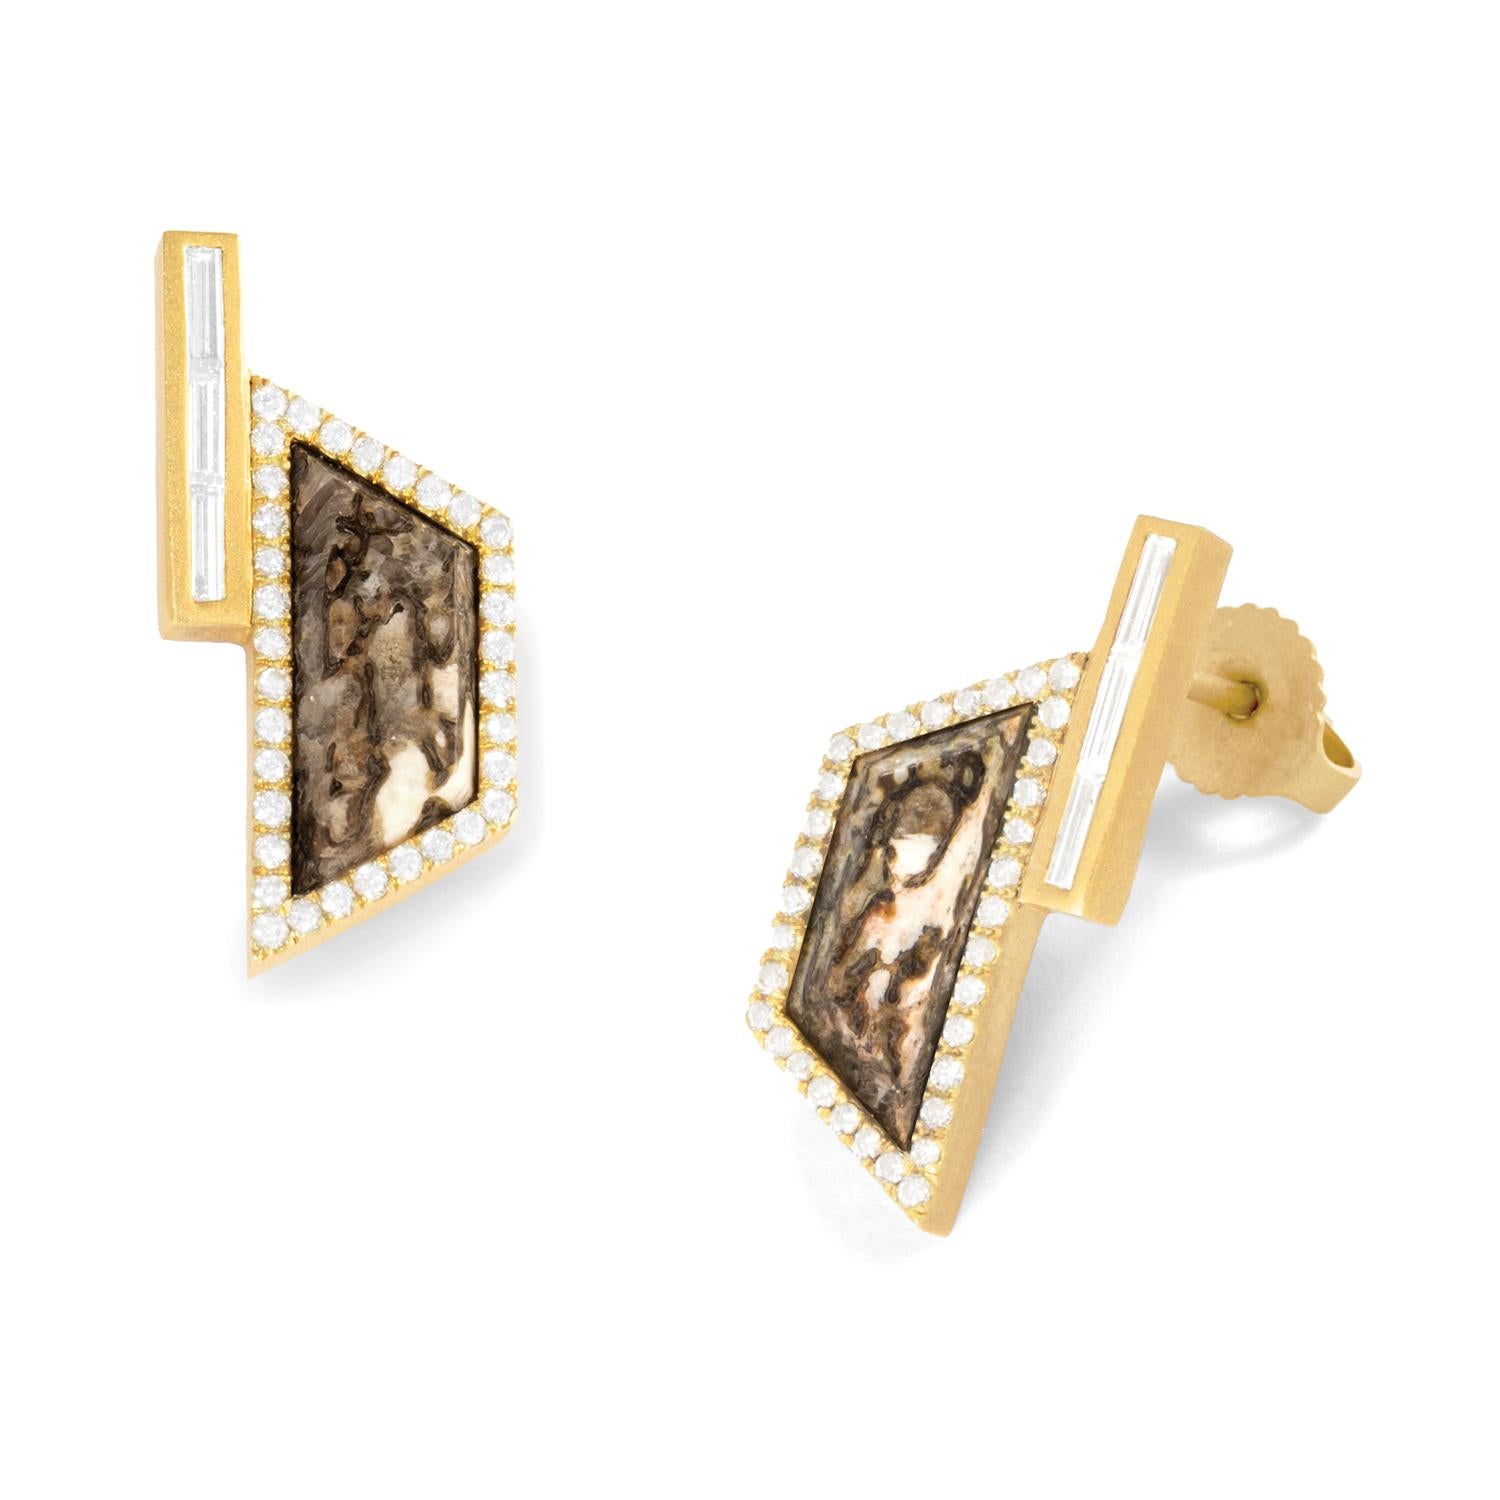 Umber fossilized dinosaur bone earrings with white diamond baguettes and white diamond pavé, 18 carat recycled yellow gold, 0.60 TCW  - One-of-a-kind

Trapezoids of umber fossilized dinosaur bone are framed in pavé-set white diamonds and aligned